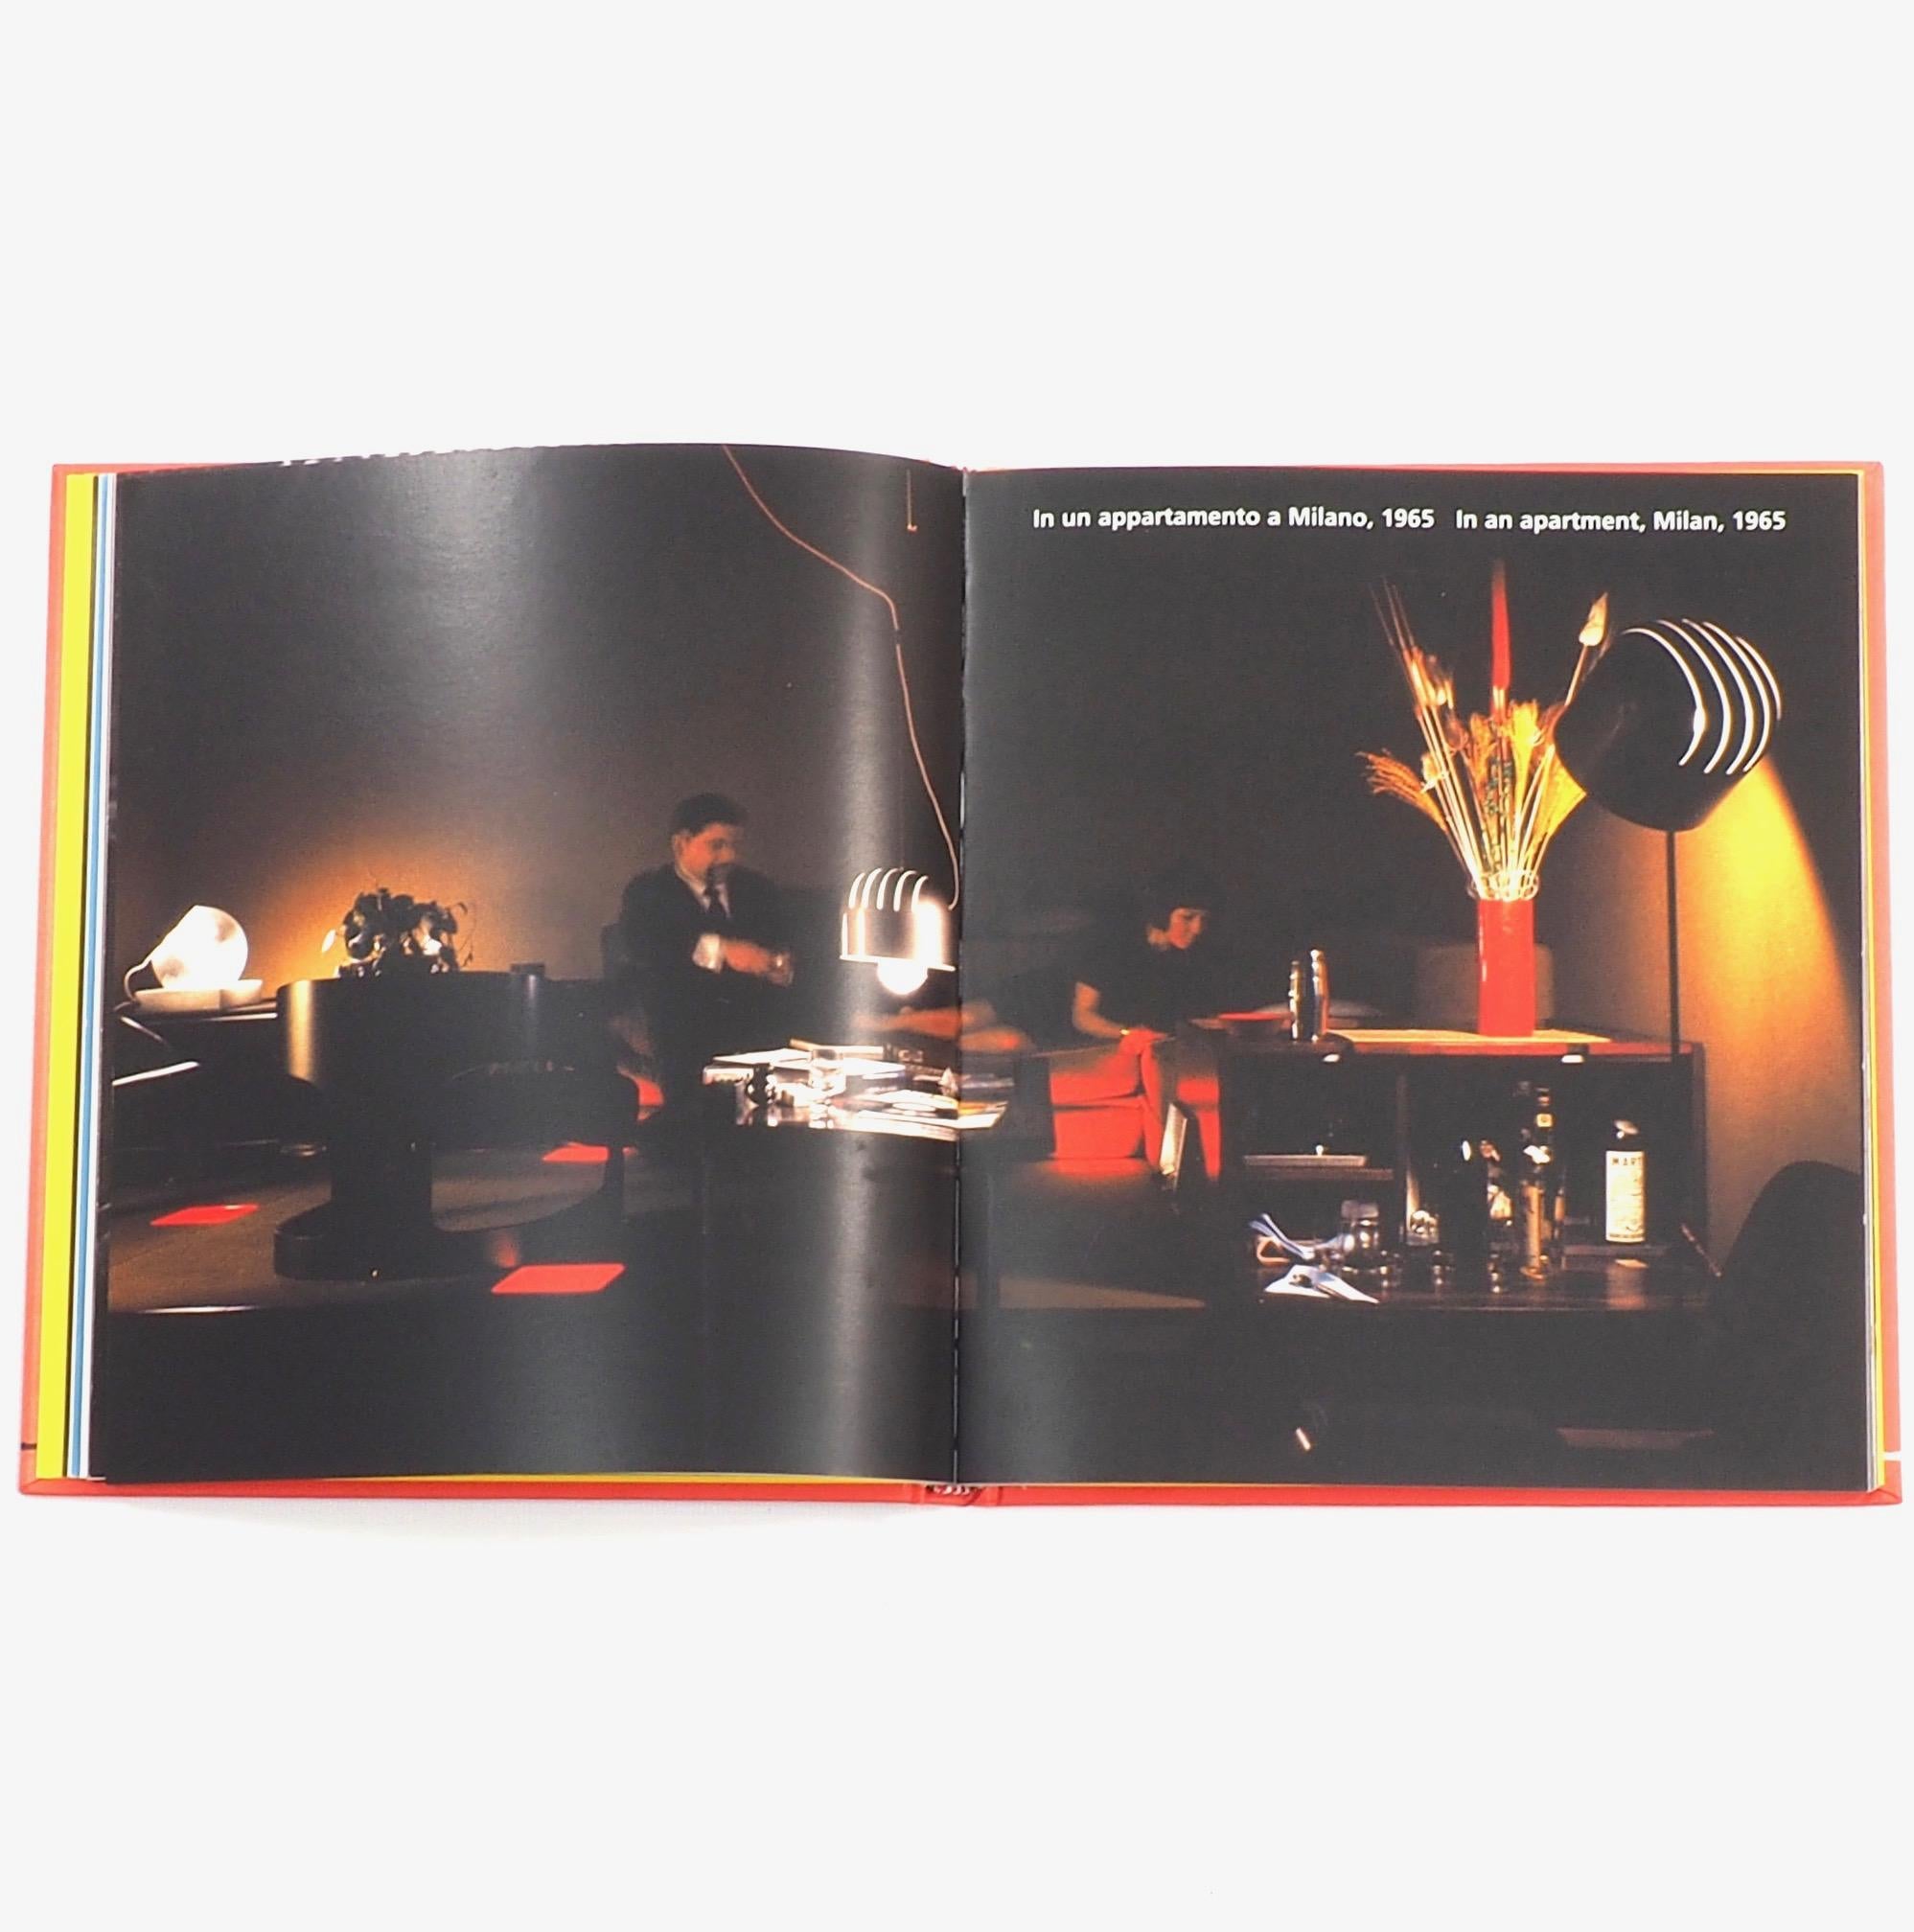 Joe Colombo - Lighting design, Interior design. Published by O luce, Milano, 2002. First edition.

This fabulous resource on the iconic designs of Joe Colombo is one of the few English language reference books on his work. It was published by O